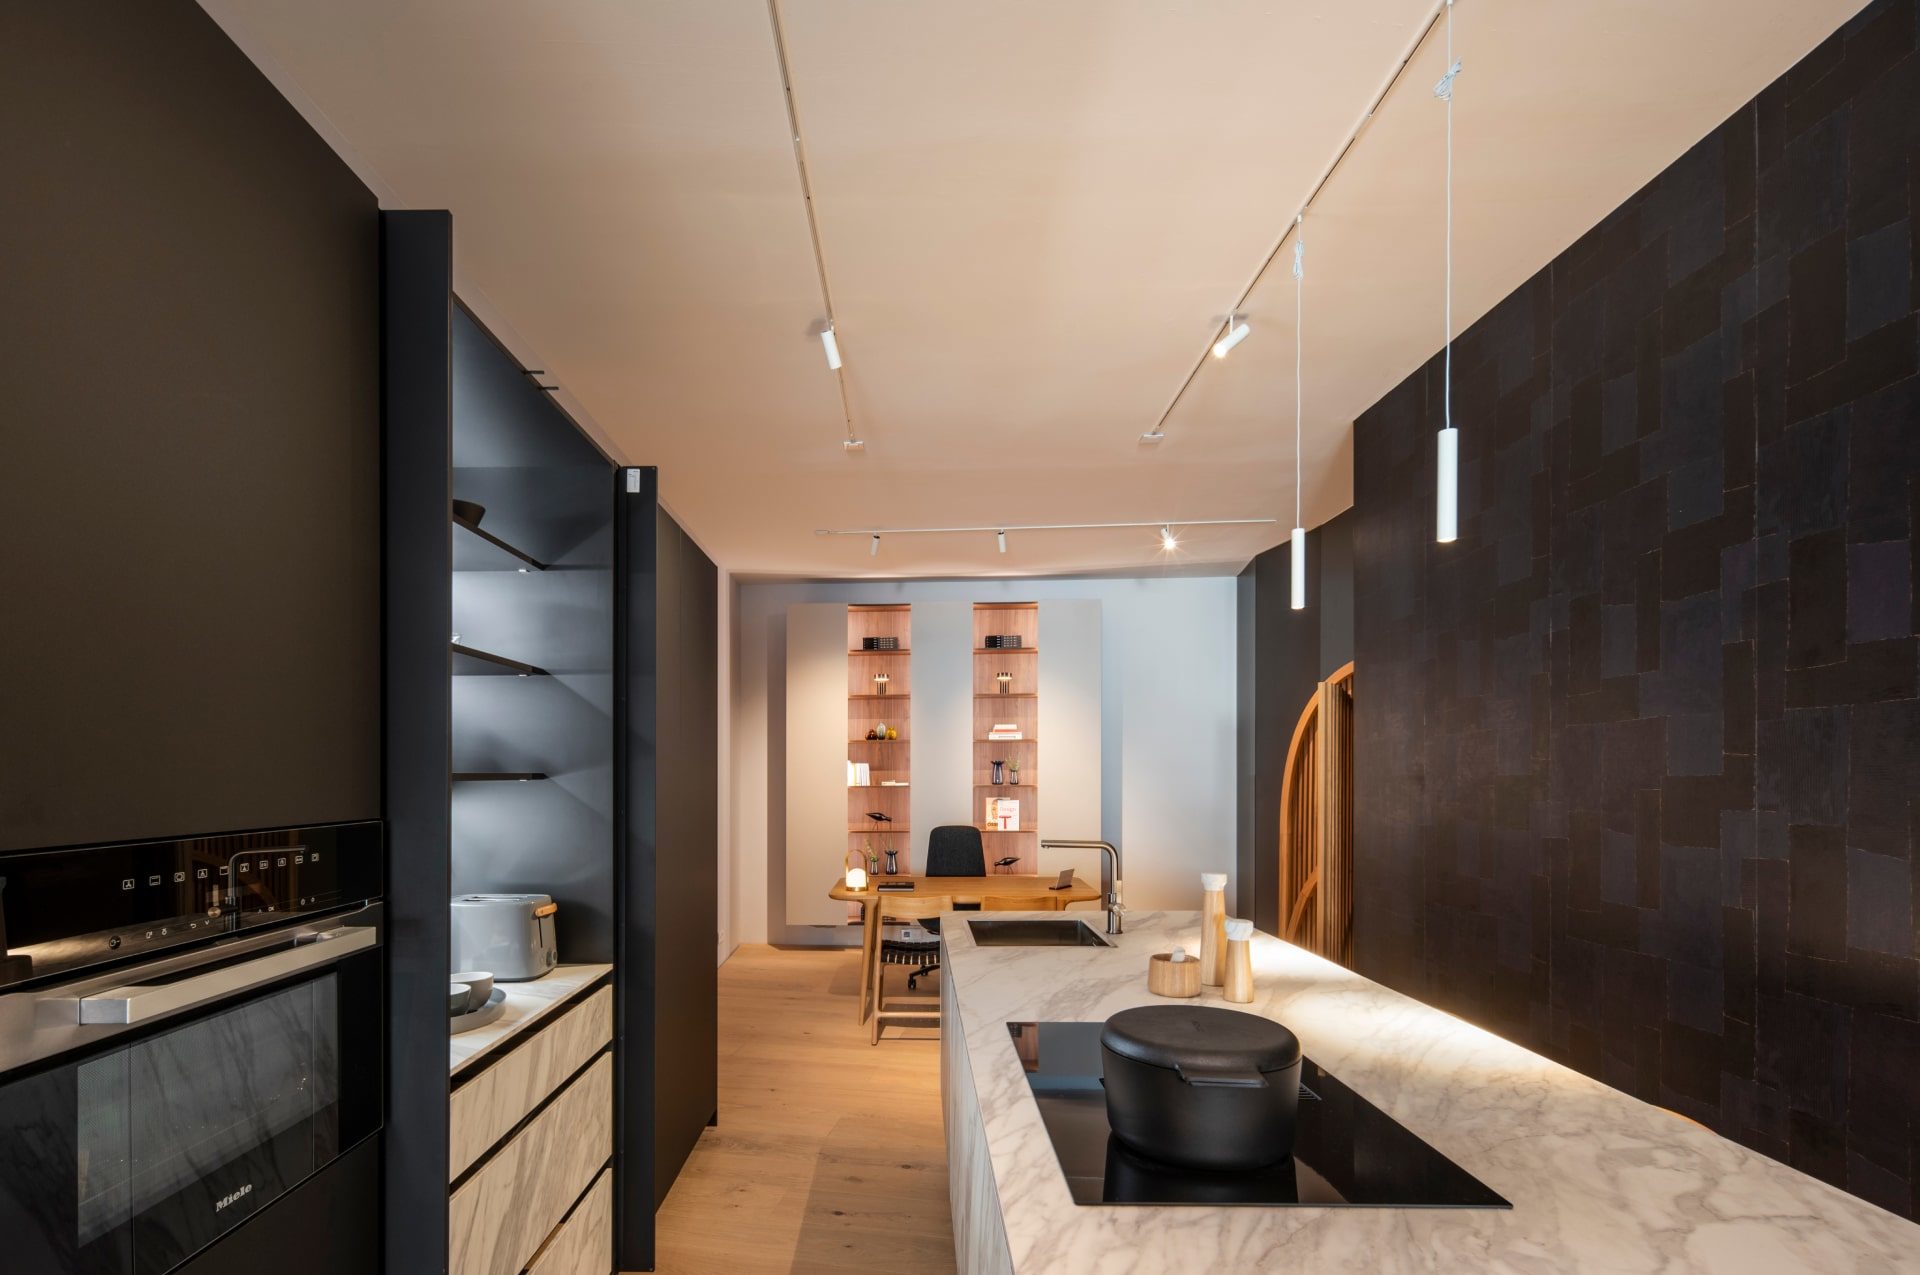 eba showroom, kitchen design company in Auch, near Toulouse